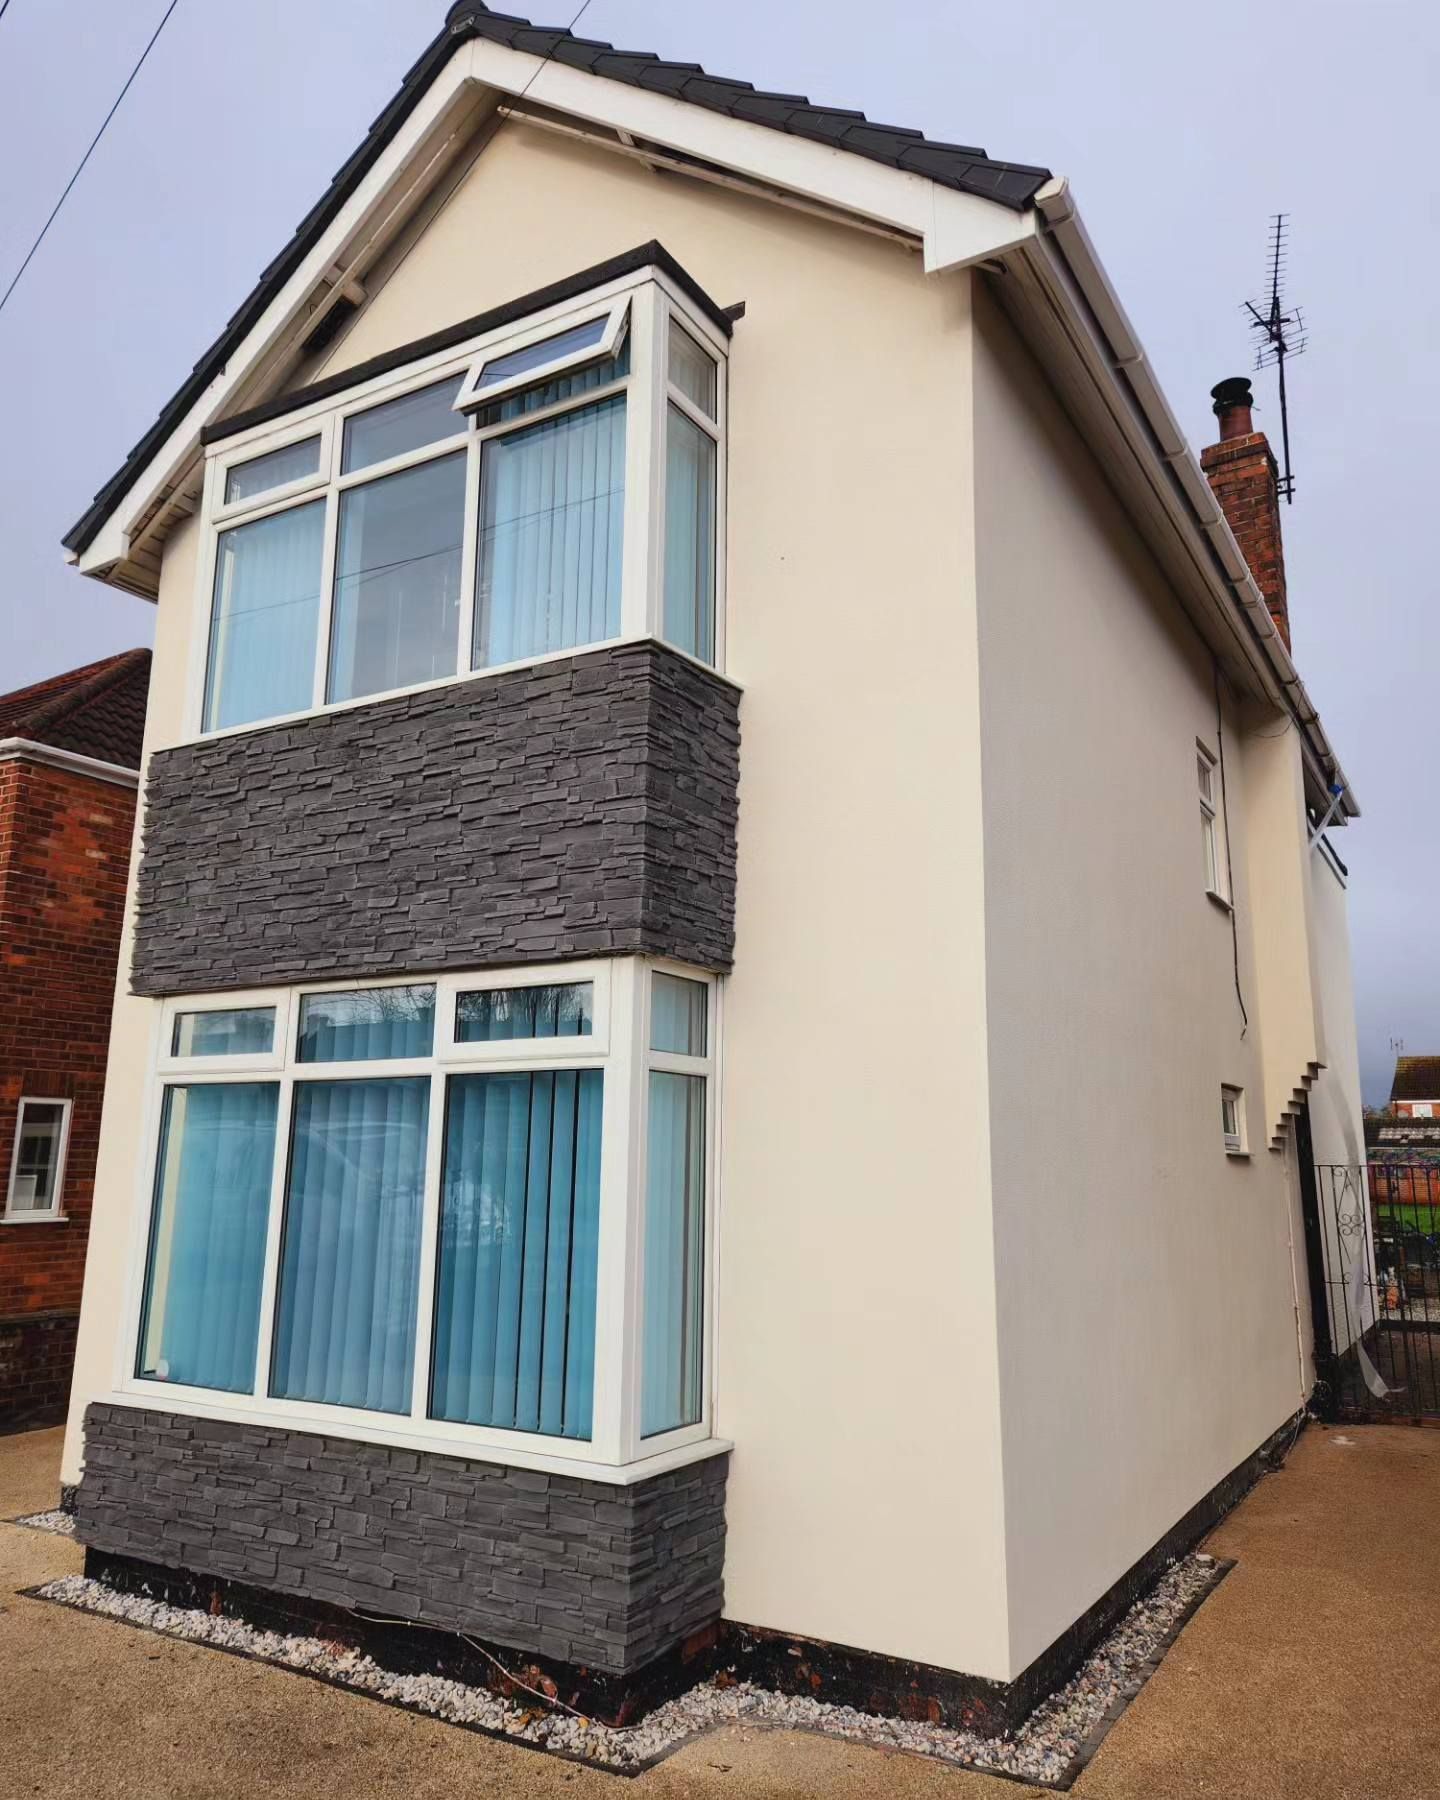 EWI - External Wall Insulation and Dash Render System by JUB